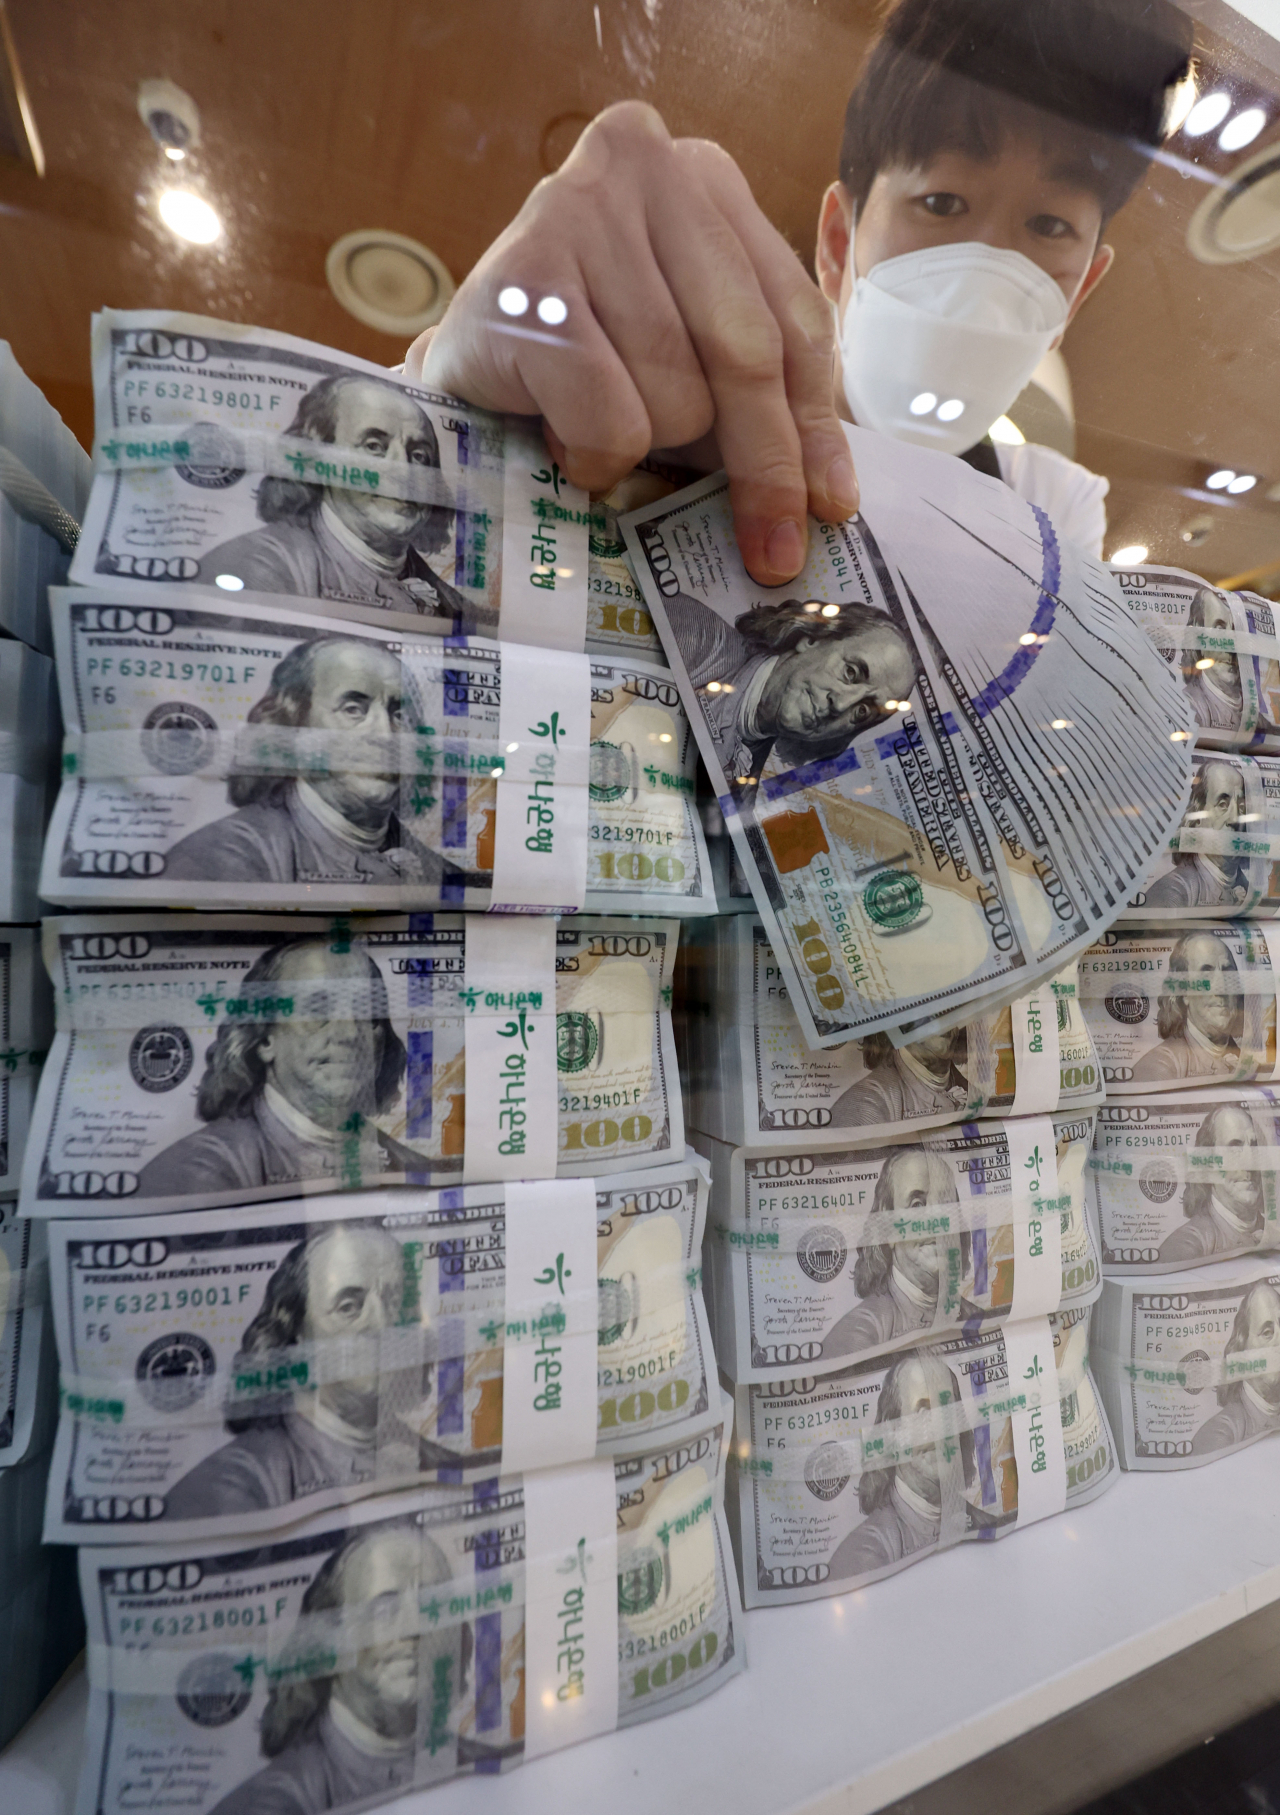 A clerk checks US dollars at the headquarters of Hana Bank in Seoul on July 5. South Korea's foreign exchange reserves dropped $9.43 billion on-month to $438.28 billion as of end-June, marking the biggest monthly decline since 2008, according to the Bank of Korea. (Yonhap)